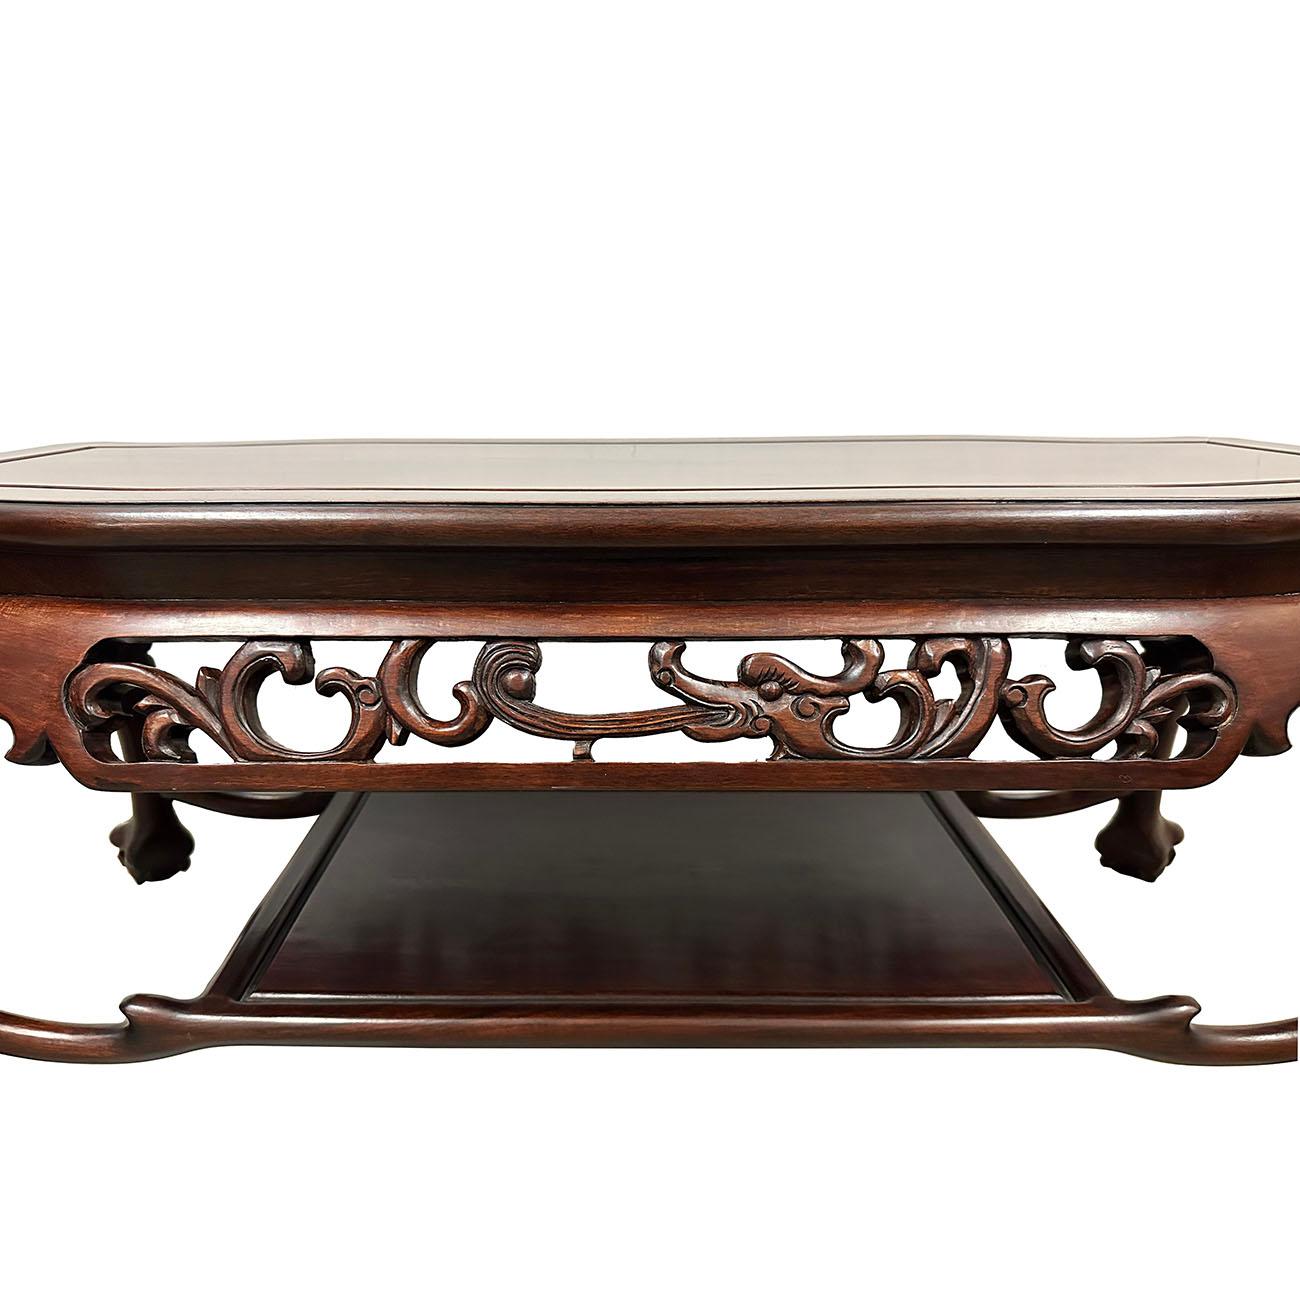 Mid-20th Century Vintage Chinese Rosewood Carved Coffee Table with Dragon Motif For Sale